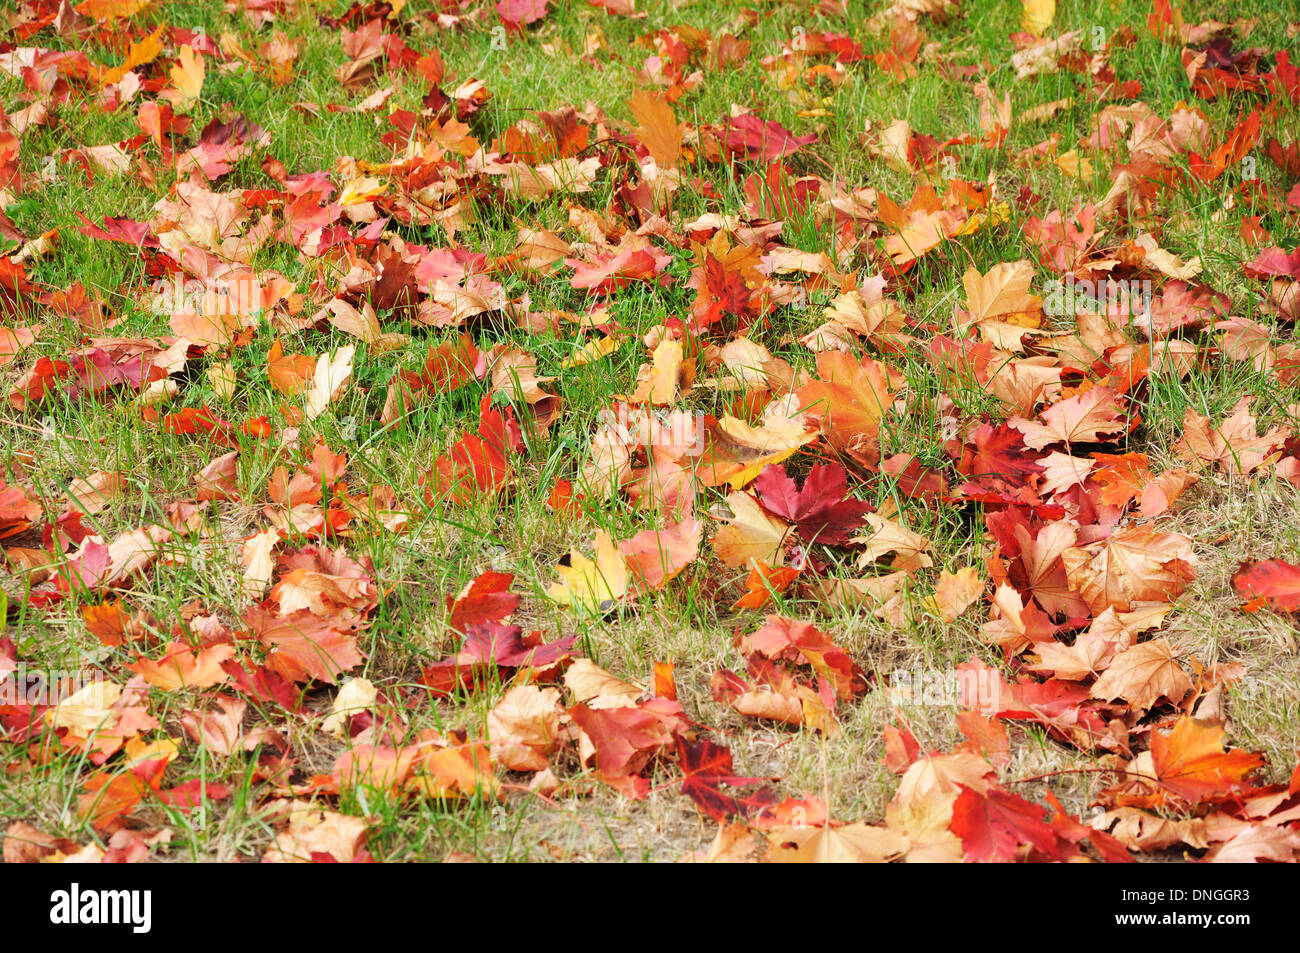 Bright red Maple's leaves on the grass Stock Photo